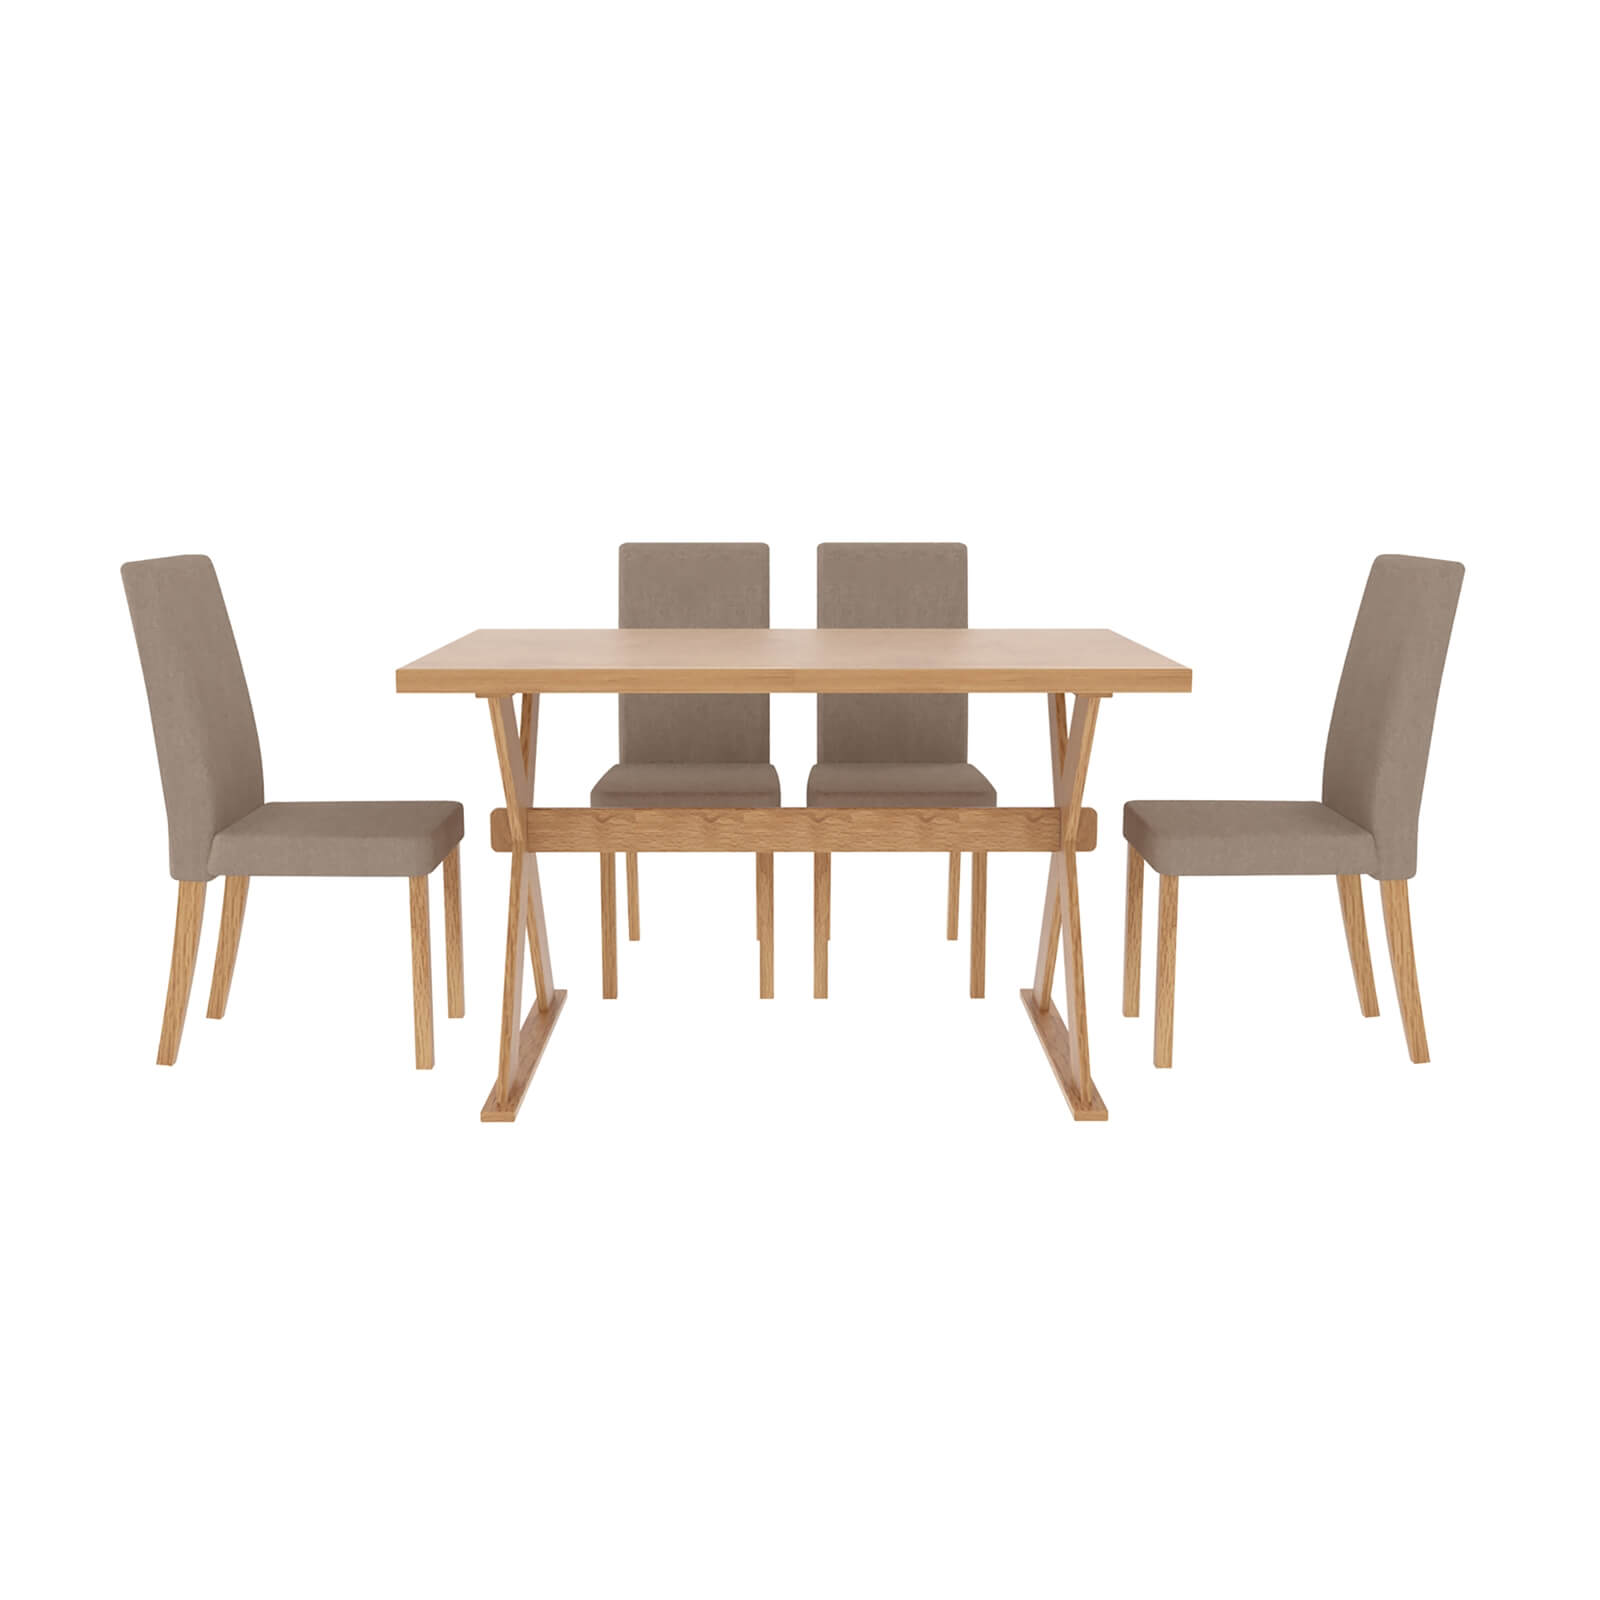 Seville 4 Seater Dining Set - Evesham Dining Chairs - Beige